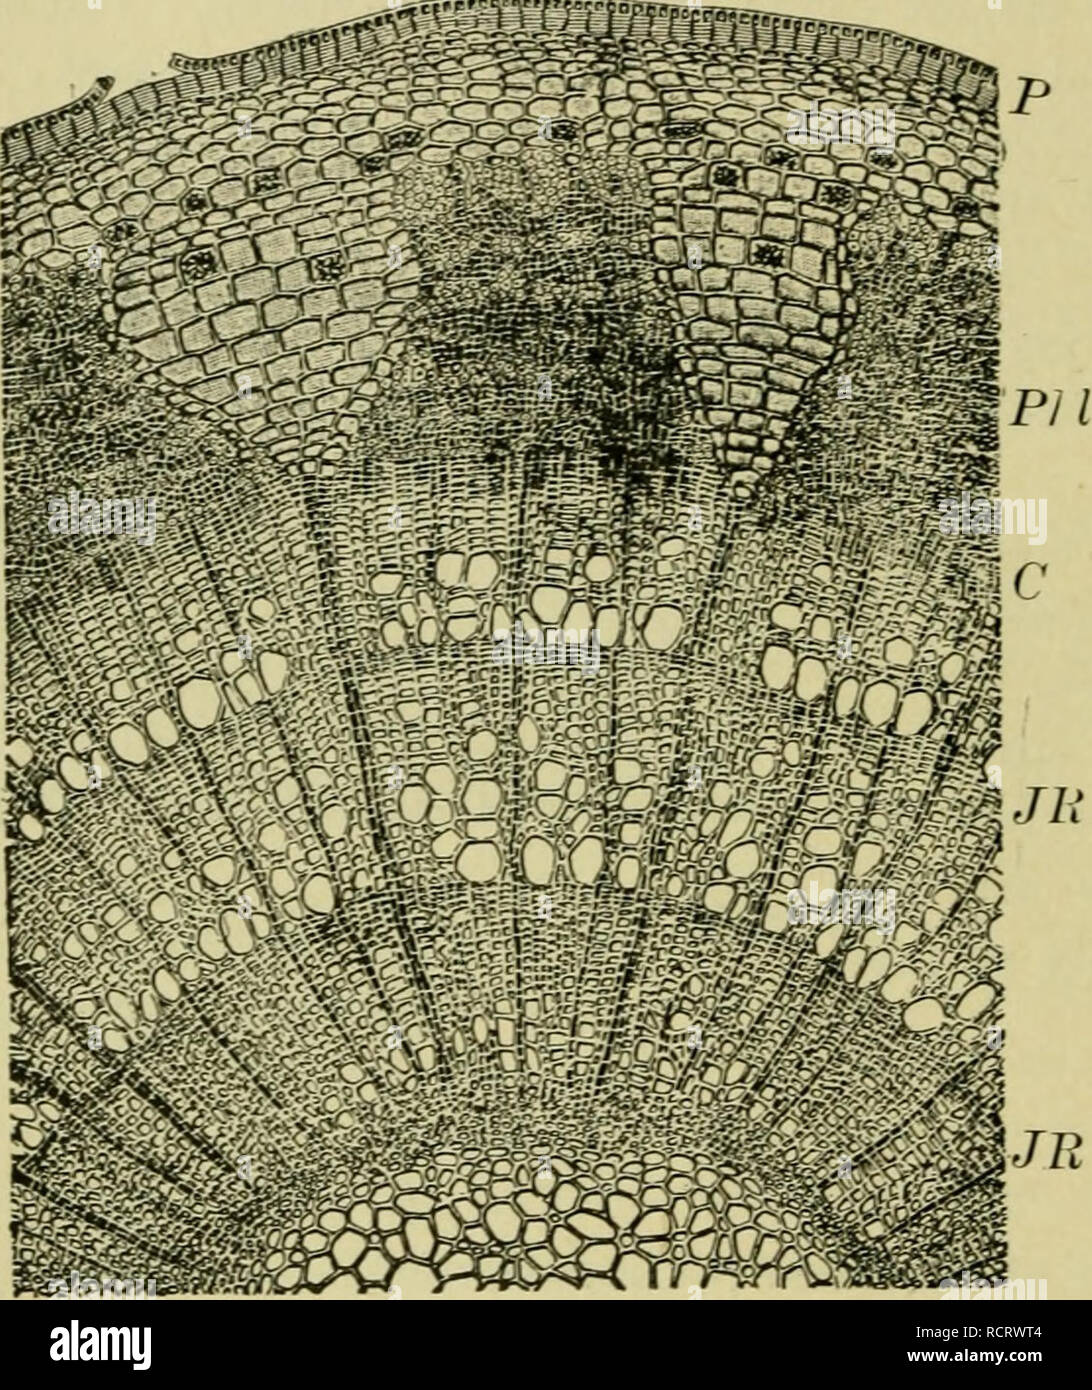 . Elements of botany. Plants. 54 ELEMENTS OF BOTANY. Examine each thin section first with a power of about 25 diameters, then with a power of from 100 to 200 diameters. With the lower power, sketch a one-year-old section, labeling in your sketch : (a) The corky layer of the bark. (6) The green layer. (c) The masses of bast fibres. {d) The wood, with the medullary rays and vessels. (e) The pith.. Fig. 41. — Cross-Section of a Three-year-old Linden Twig. (Much magnified.) P, epidermis and corky layer of the bark ; Phi, bast; C, cambium layer ; JB, annual rings of wood. Alter examining this secti Stock Photo